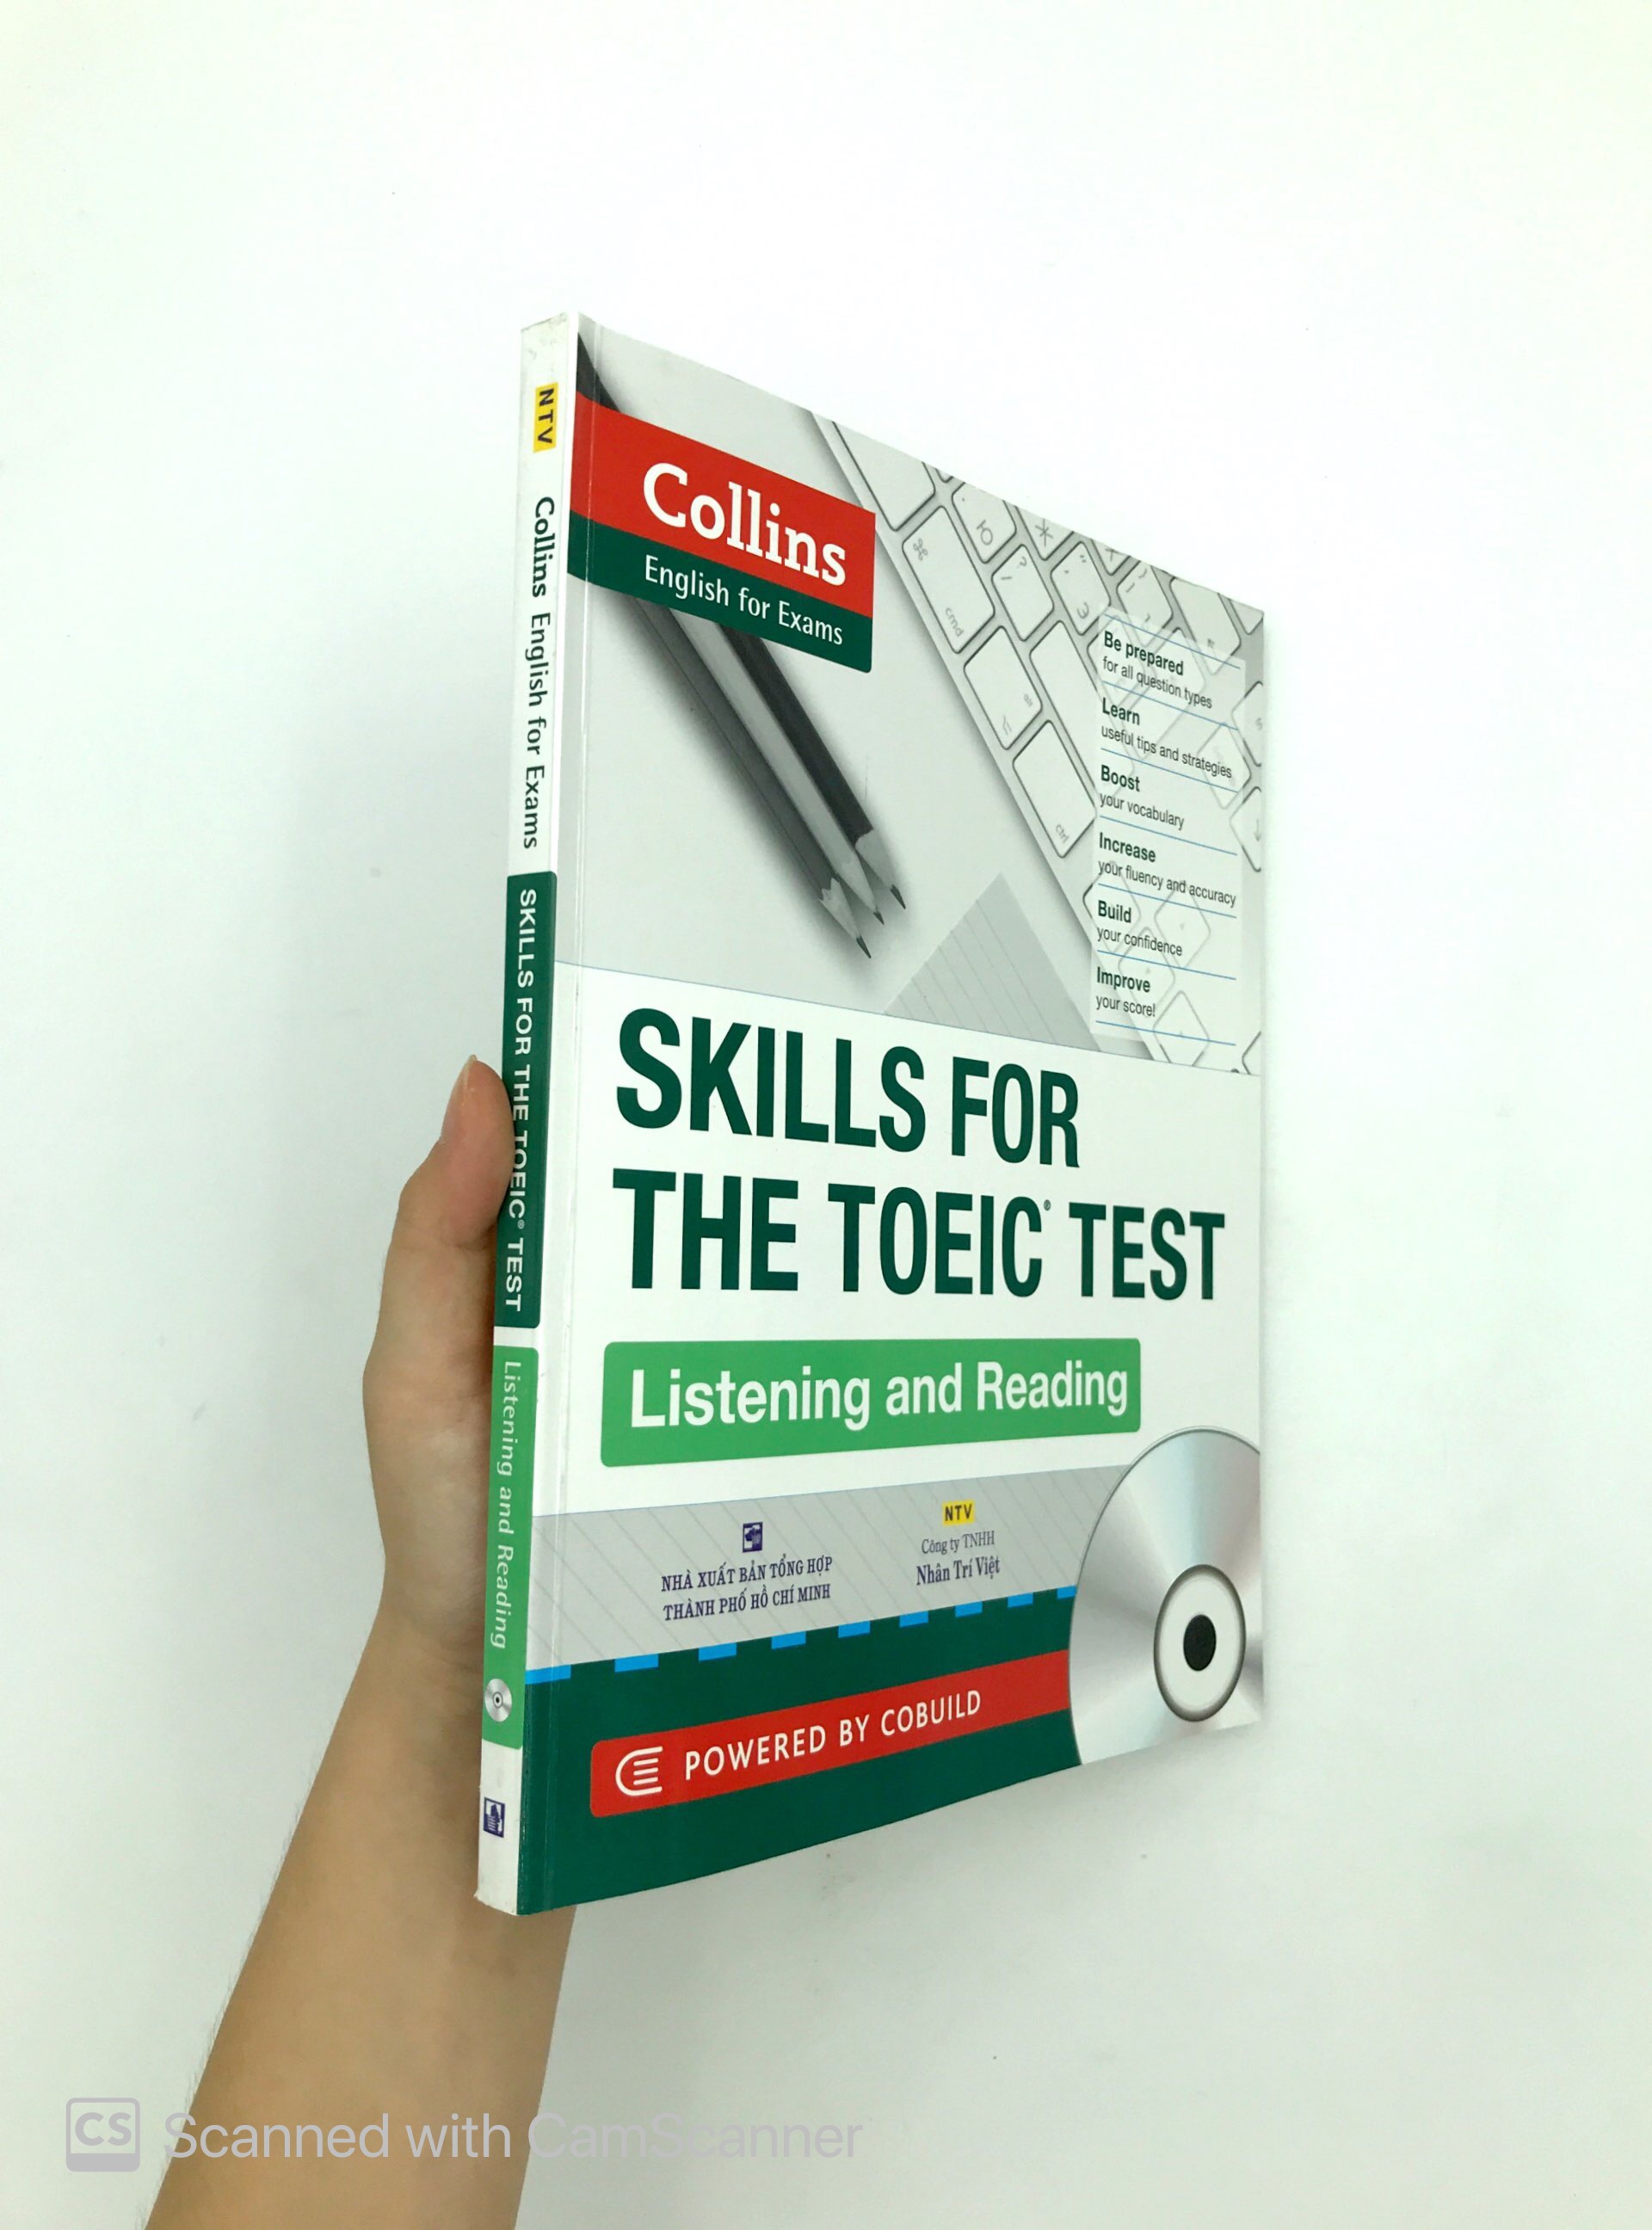 Skills for The TOEIC Test_Listening and Reading CD PDF